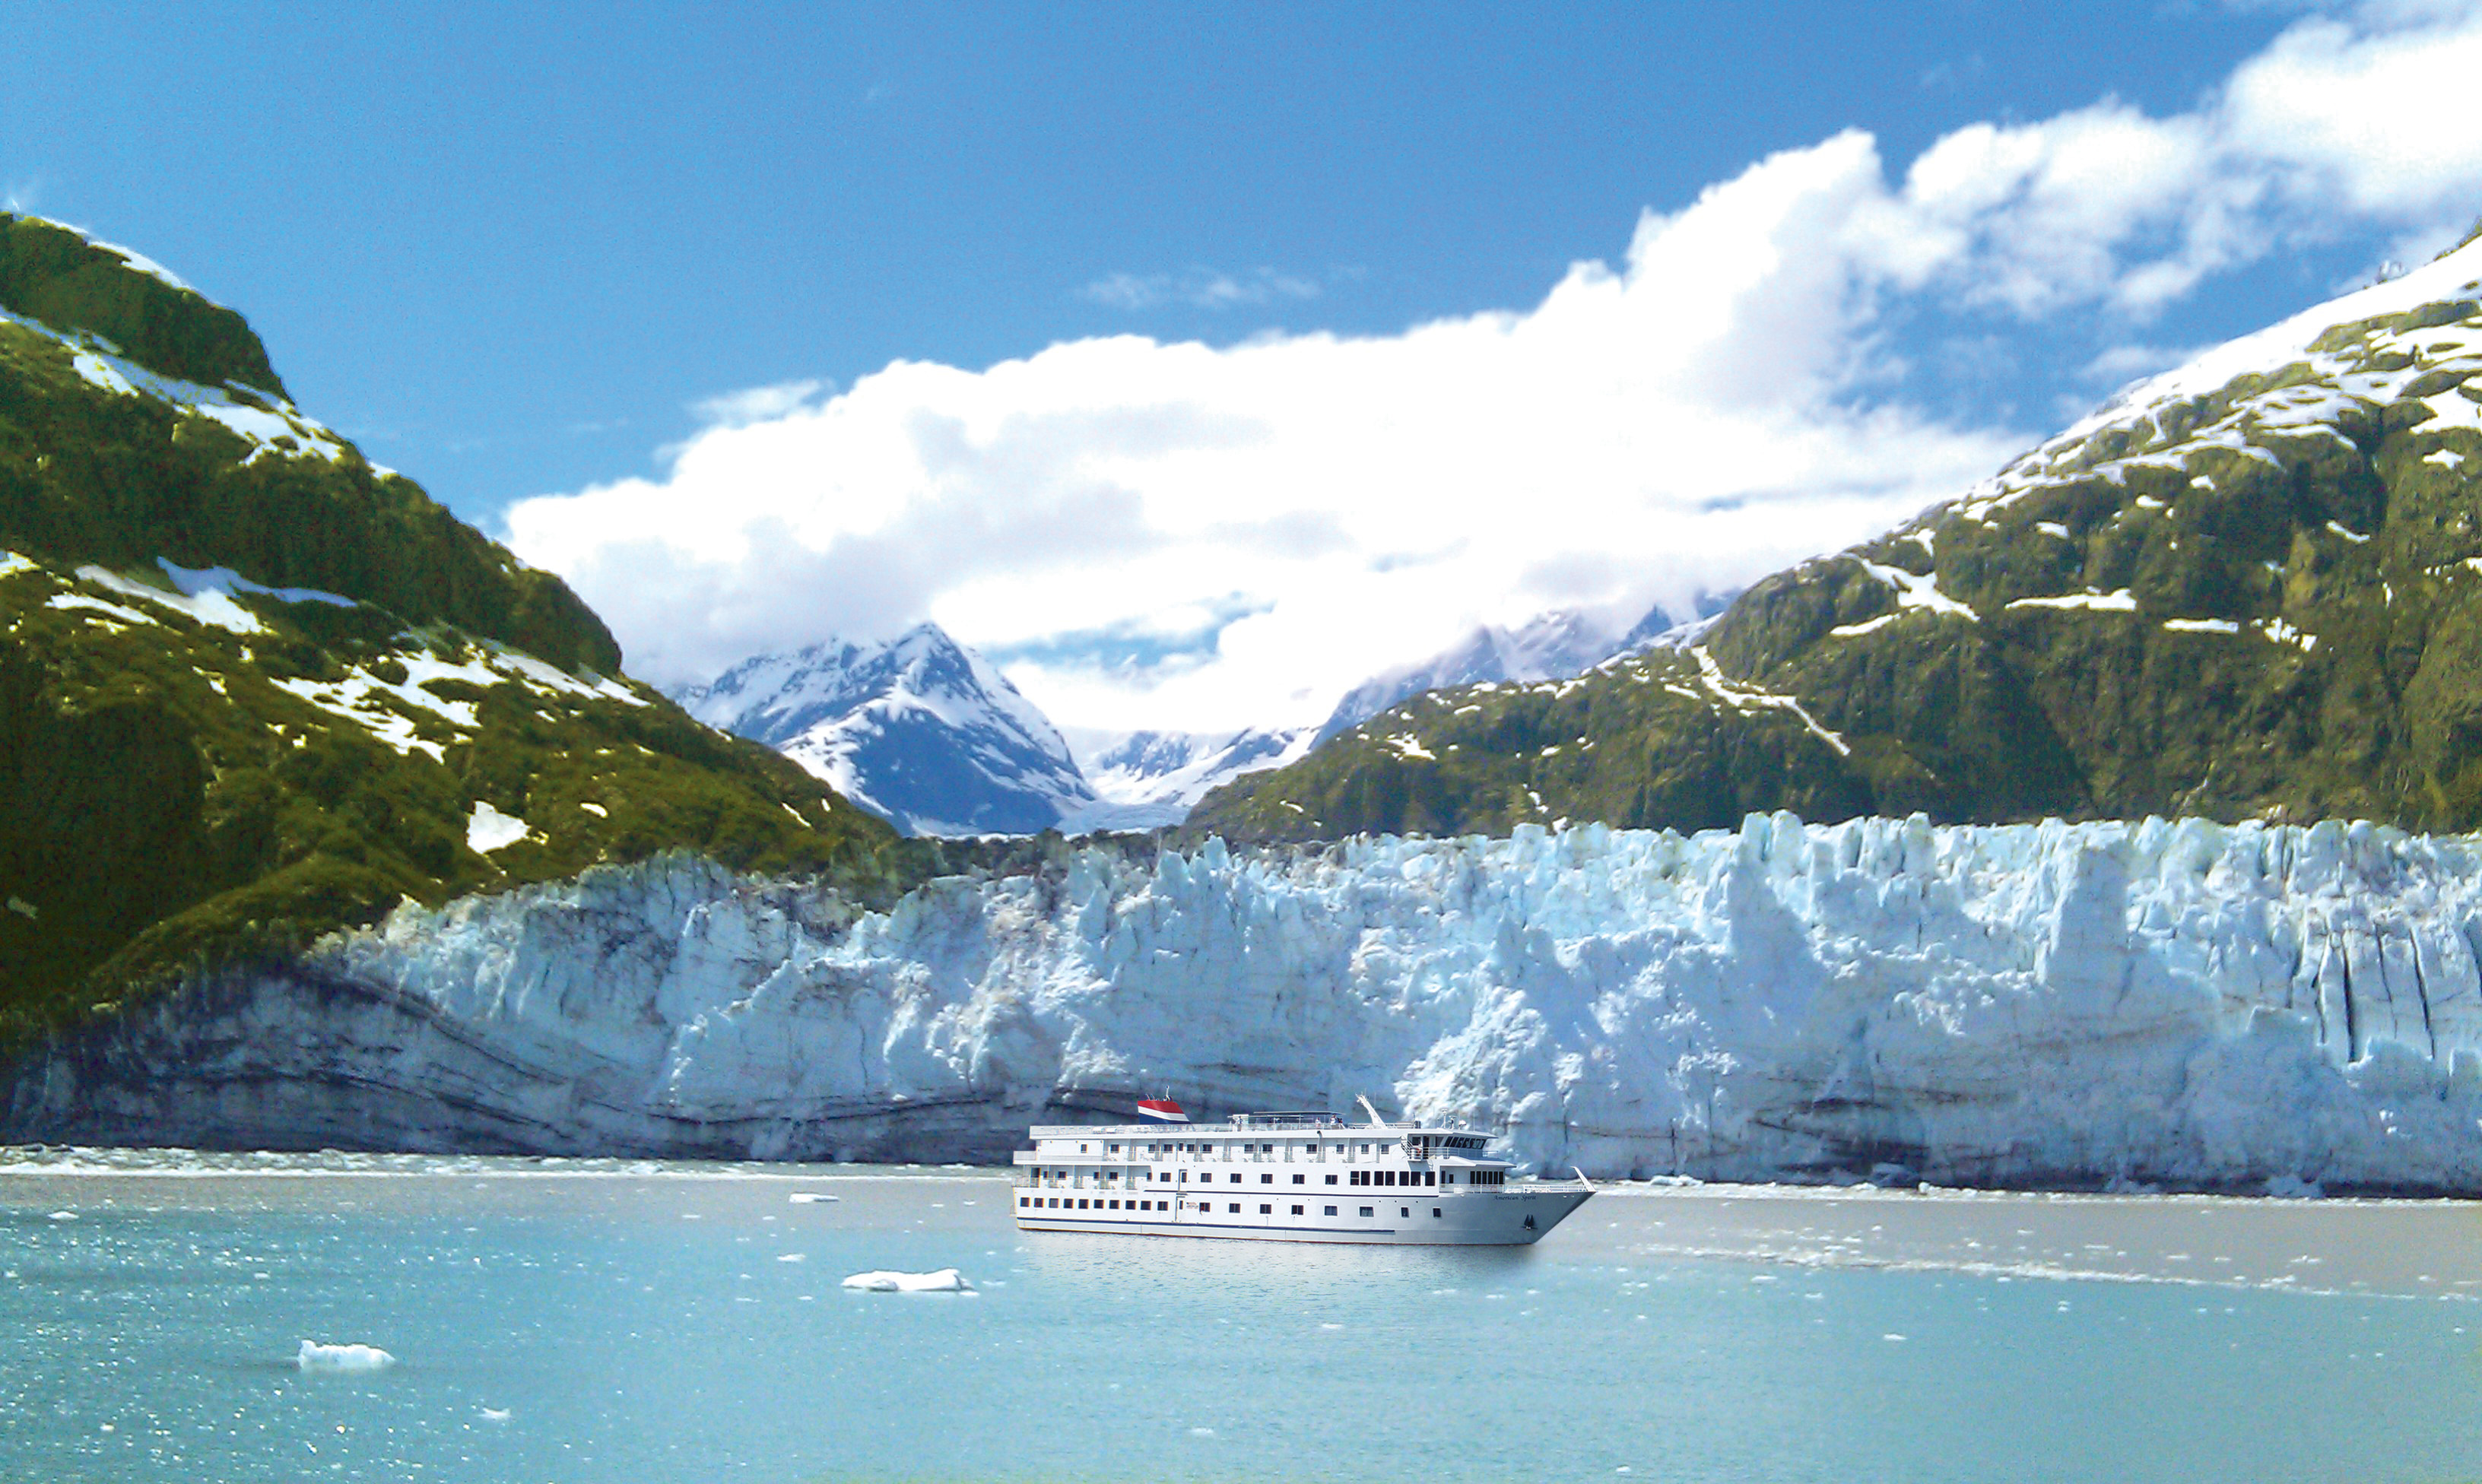 American Cruise Lines Awarded Additional “Prime Use Days” in Glacier Bay